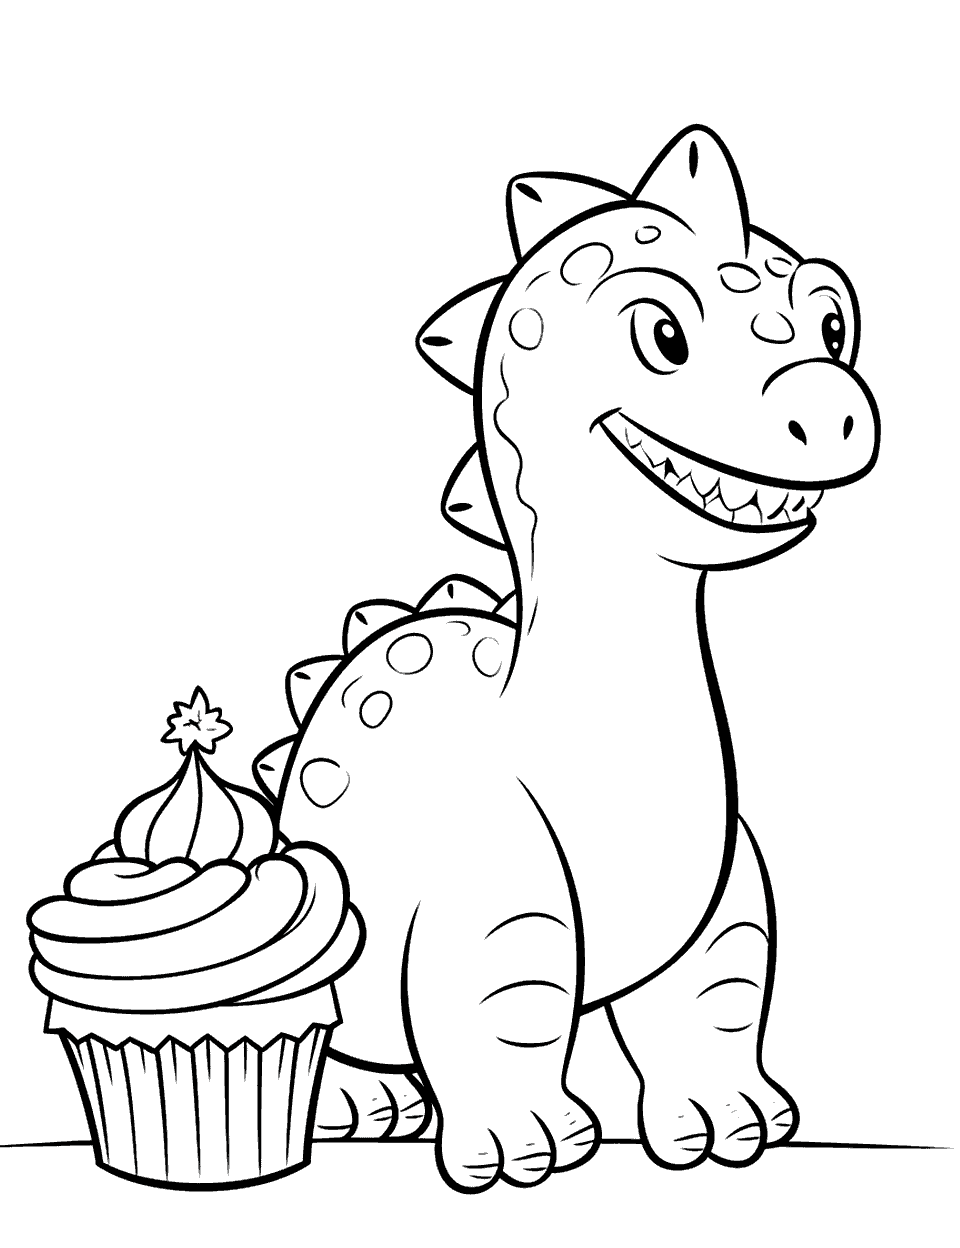 Dinosaur and Cupcake Coloring Page - A friendly dinosaur standing next to a giant cupcake.